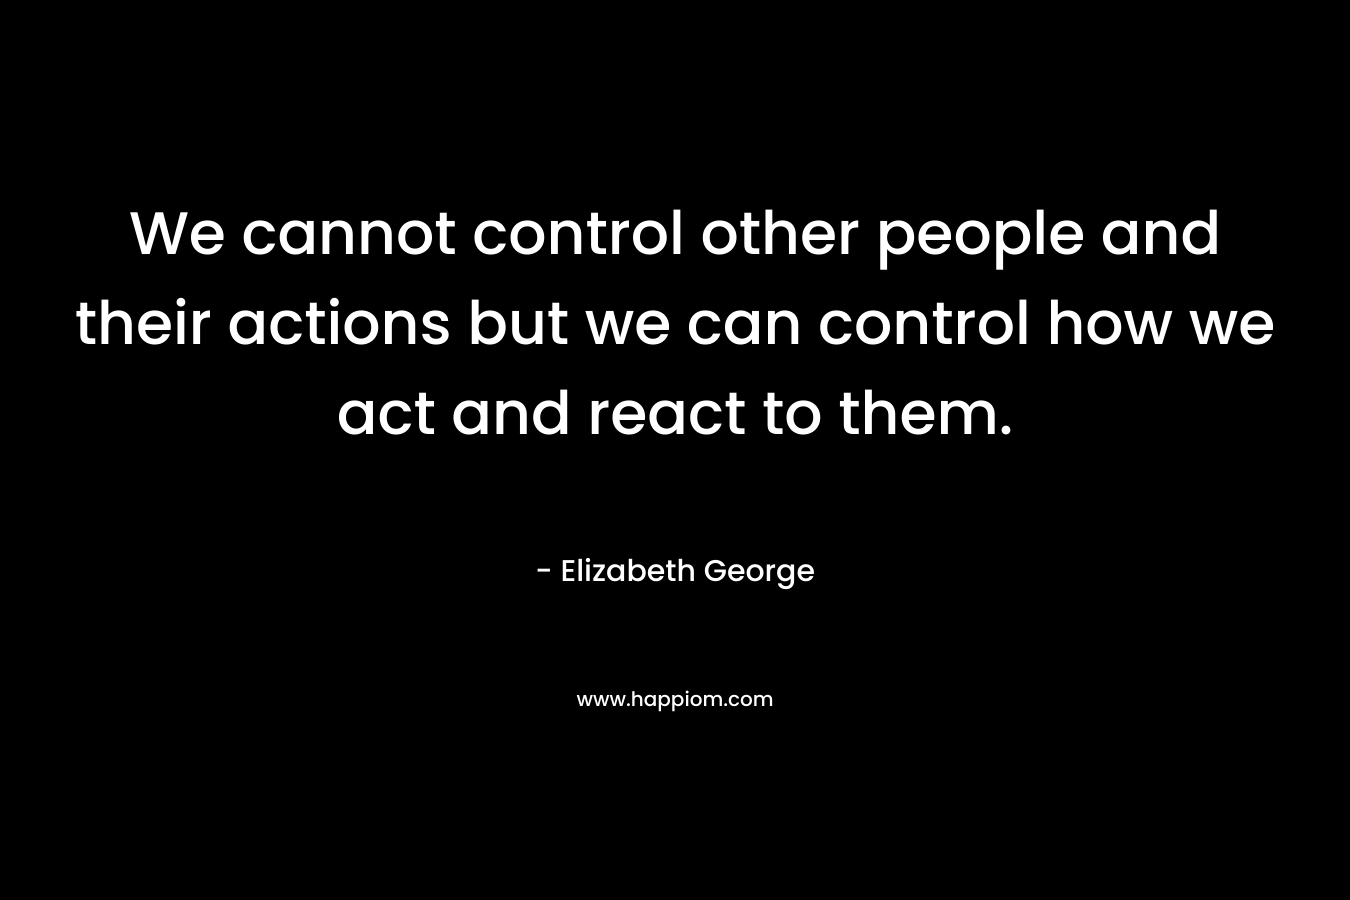 We cannot control other people and their actions but we can control how we act and react to them. – Elizabeth George